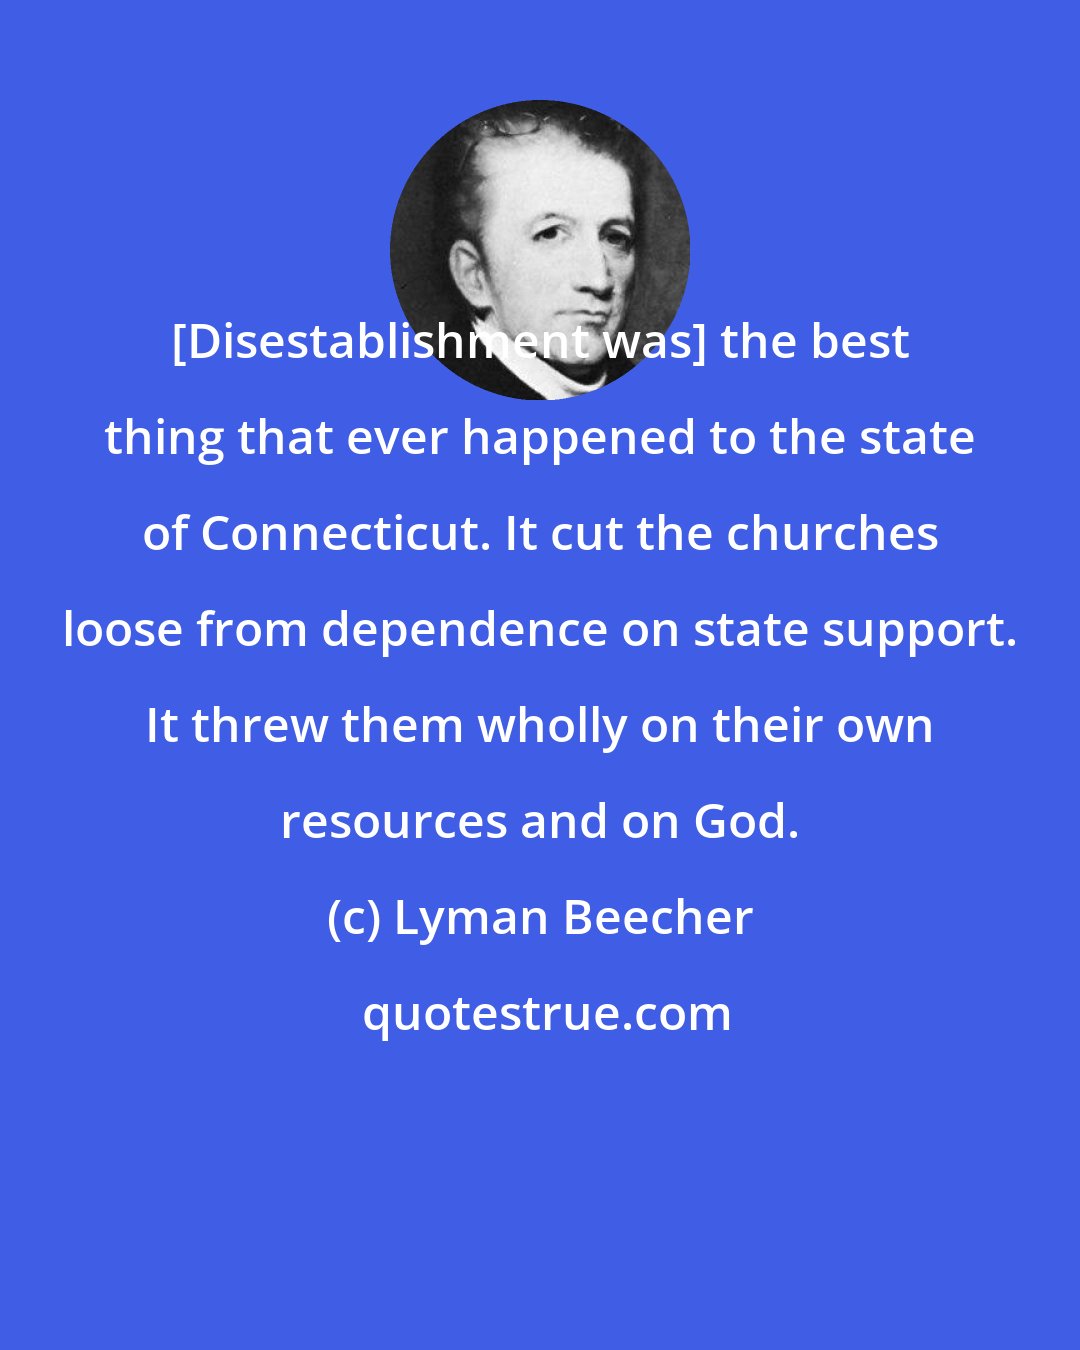 Lyman Beecher: [Disestablishment was] the best thing that ever happened to the state of Connecticut. It cut the churches loose from dependence on state support. It threw them wholly on their own resources and on God.